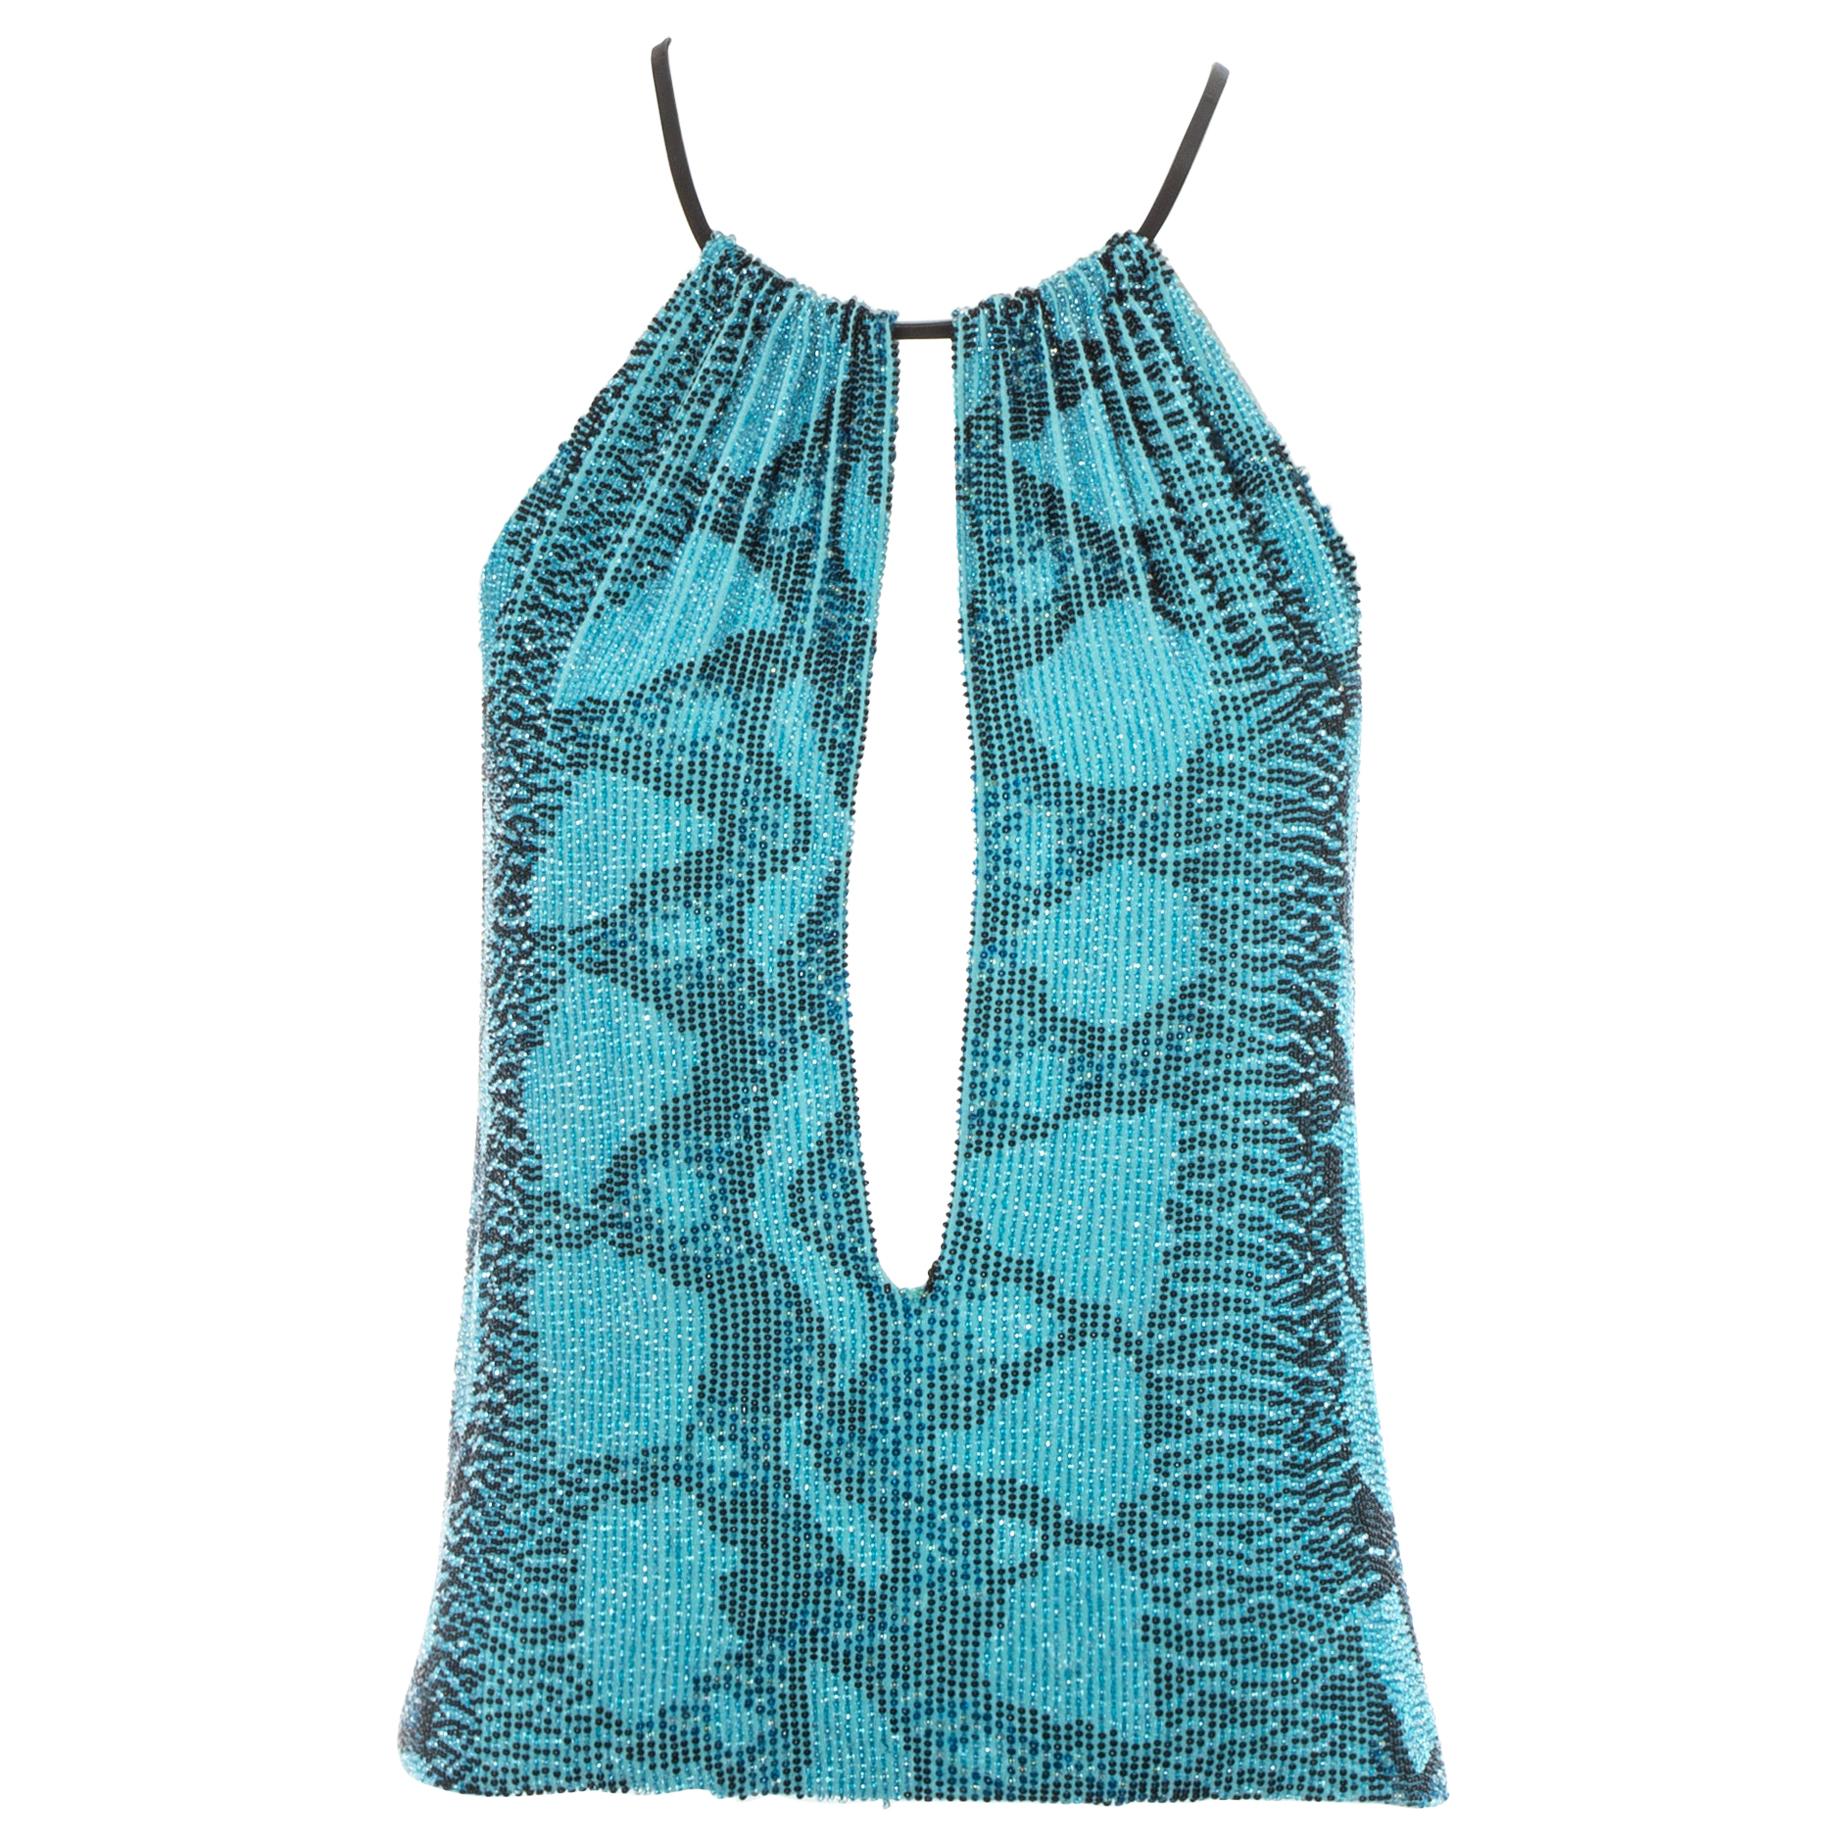 Gucci by Tom Ford blue beaded snake print evening top, ss 2000 